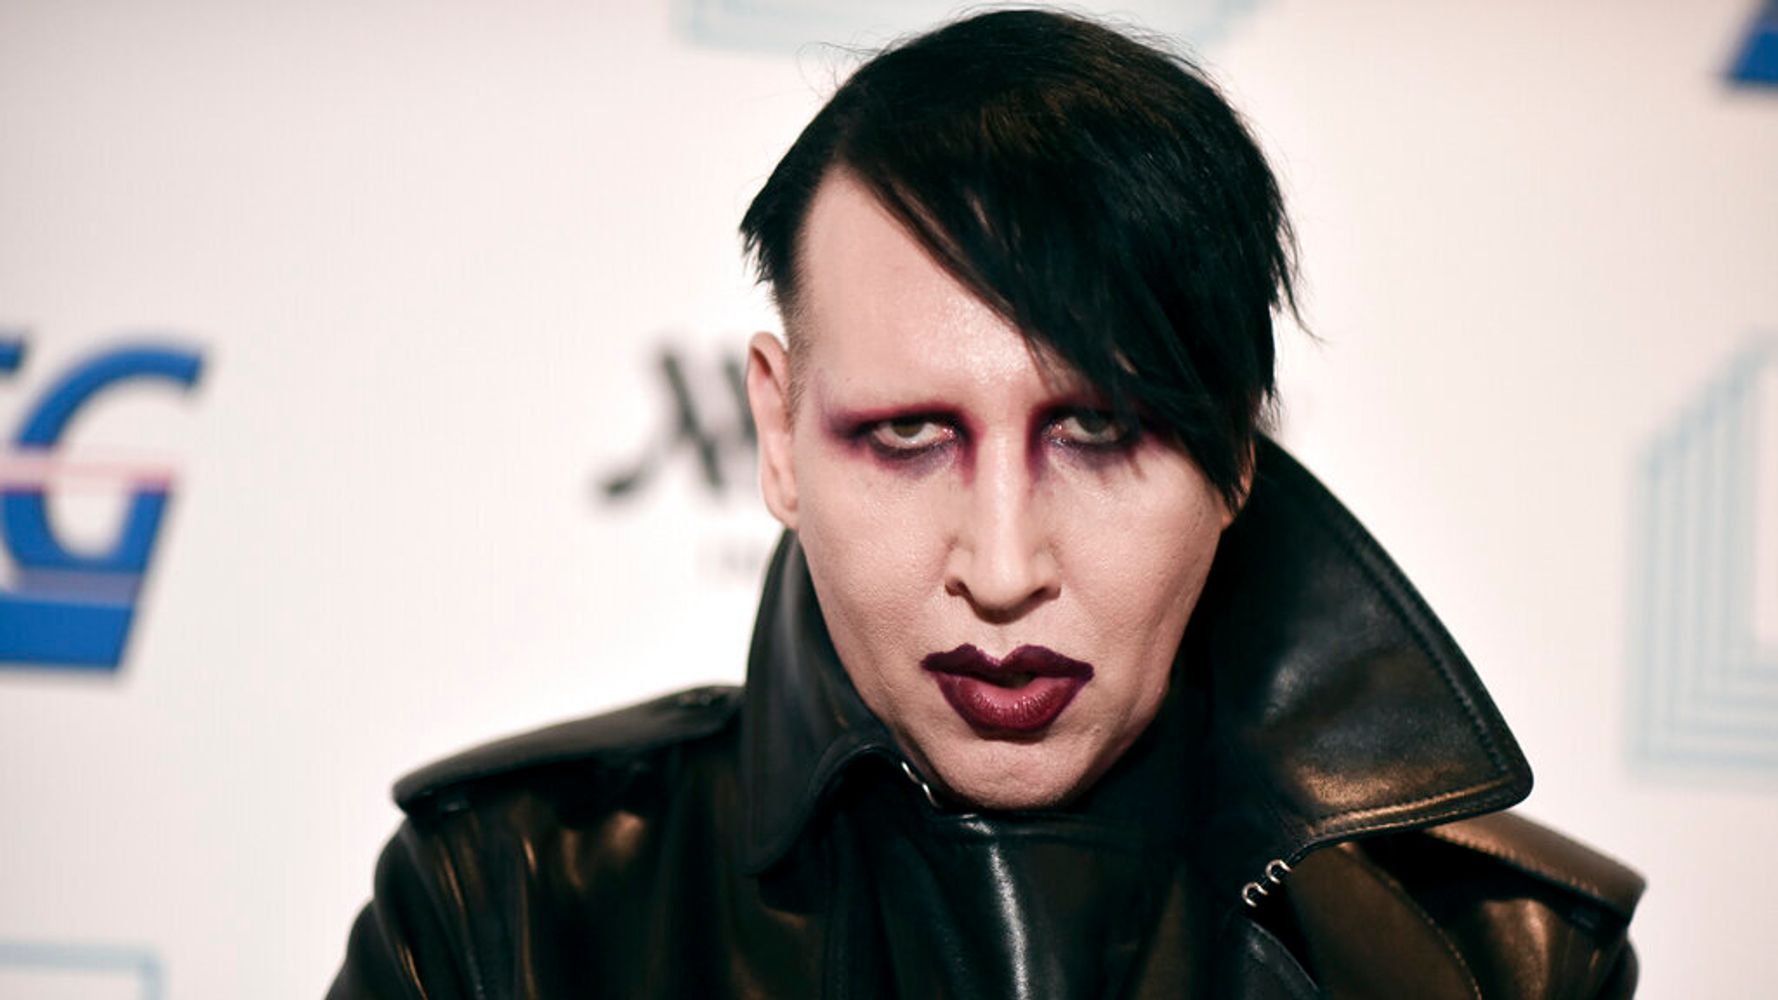 Marilyn Manson Accused Of Spitting, Blowing Snot On Woman